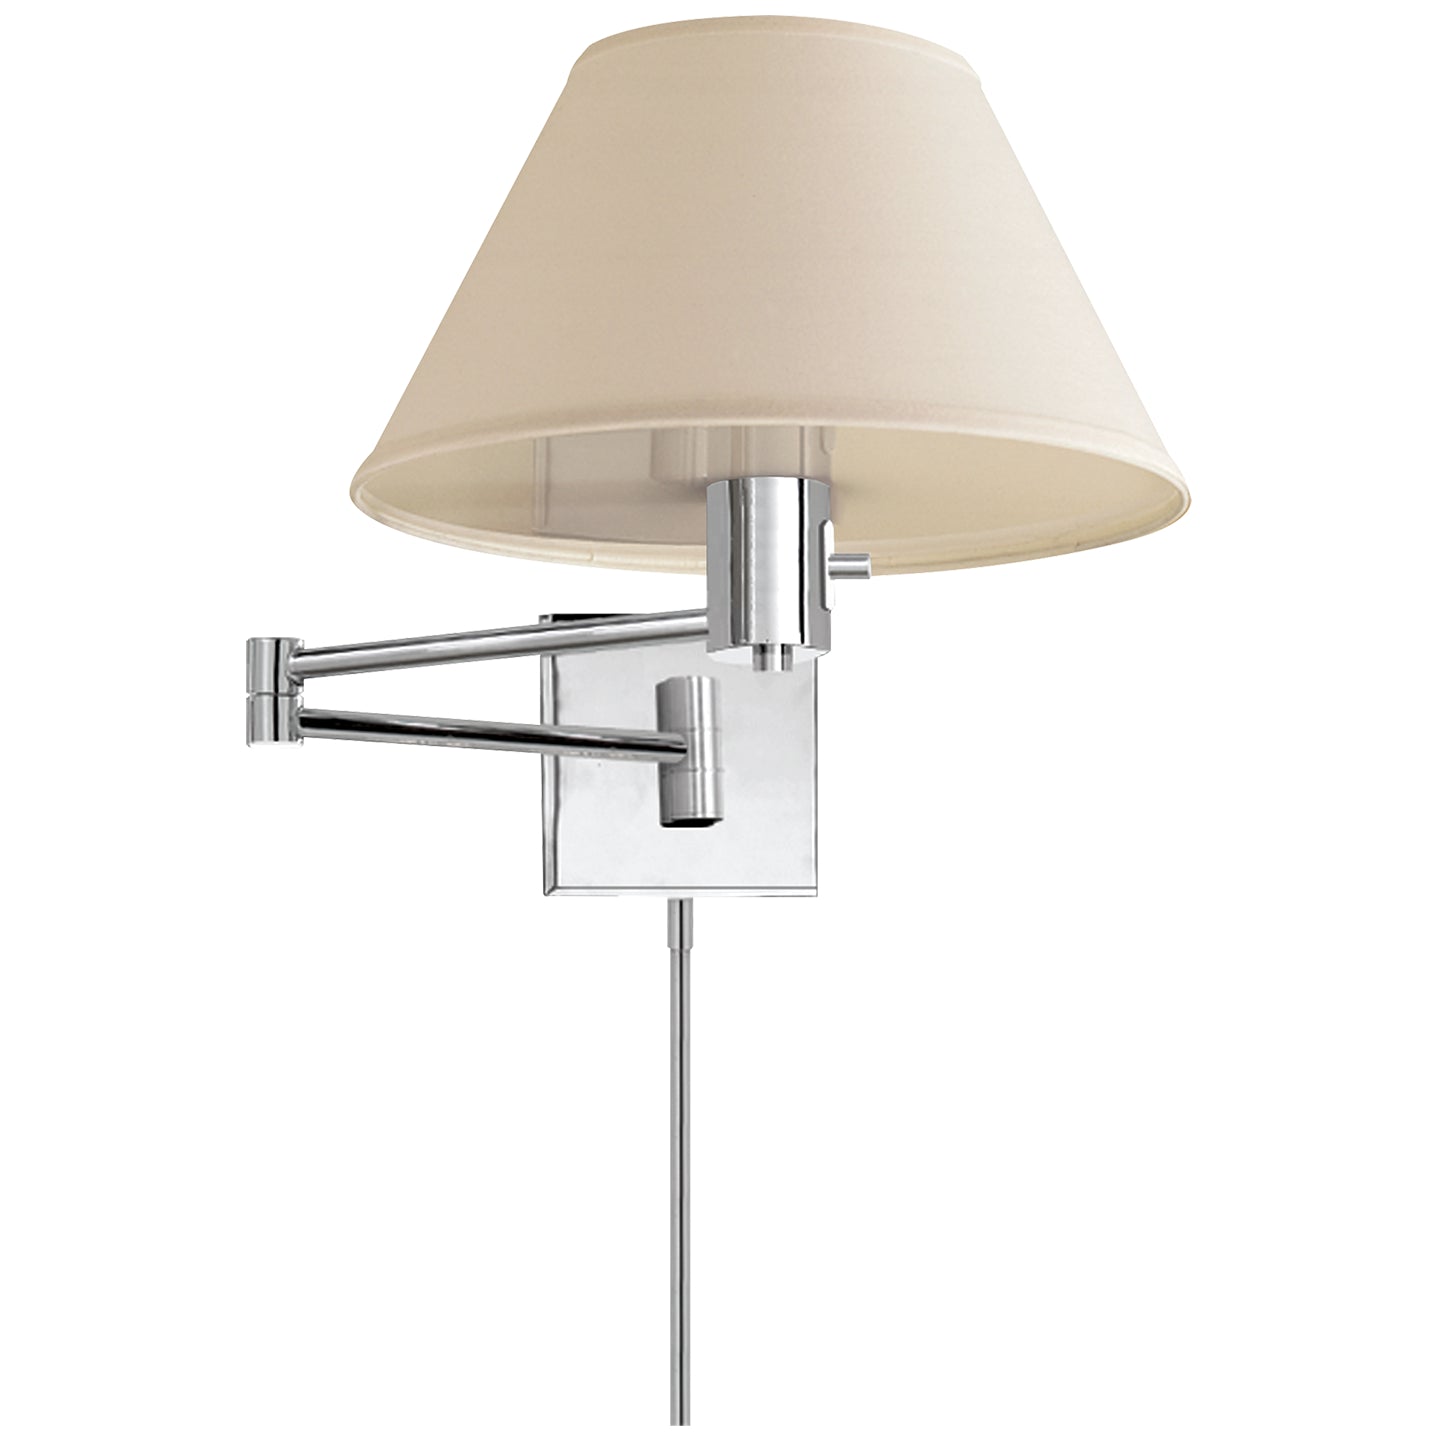 Load image into Gallery viewer, Visual Comfort Signature - 92000D PN-L - One Light Wall Sconce - VC CLASSIC - Polished Nickel
